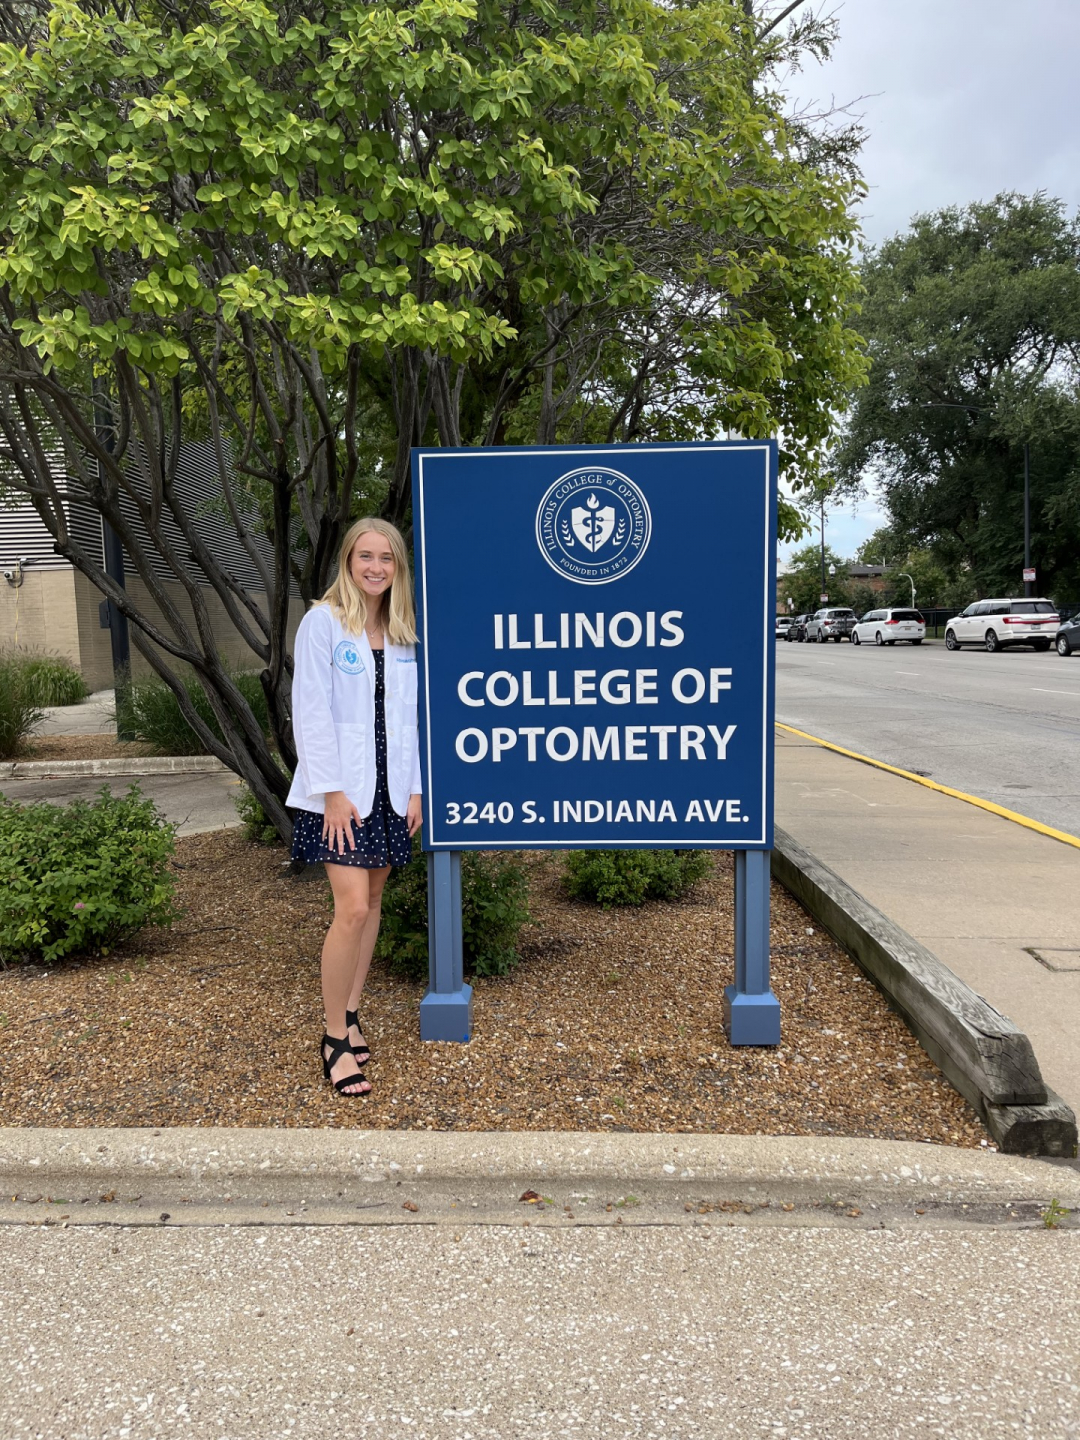 Abby stands by a sign that reads Illinois College of Optometry while wearing a white coat representing her work towards her doctorate degree. She smiles at the camera.